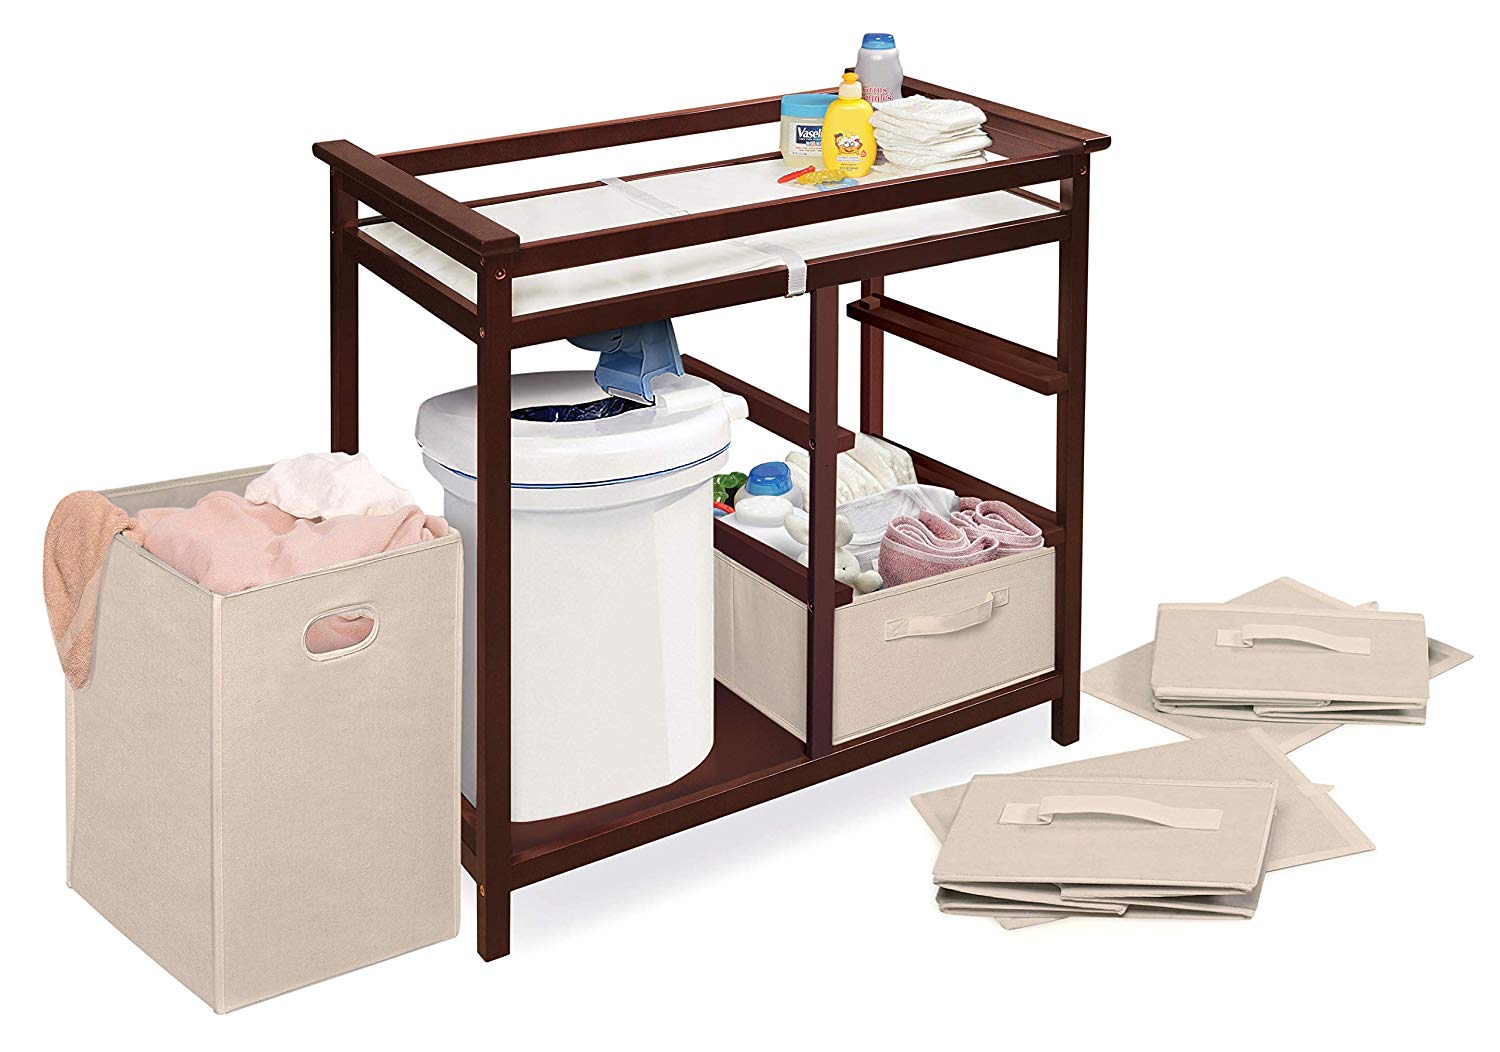 Badger Basket Modern Changing Table with Three Baskets & Hamper-Finish:Cherry - image 7 of 7